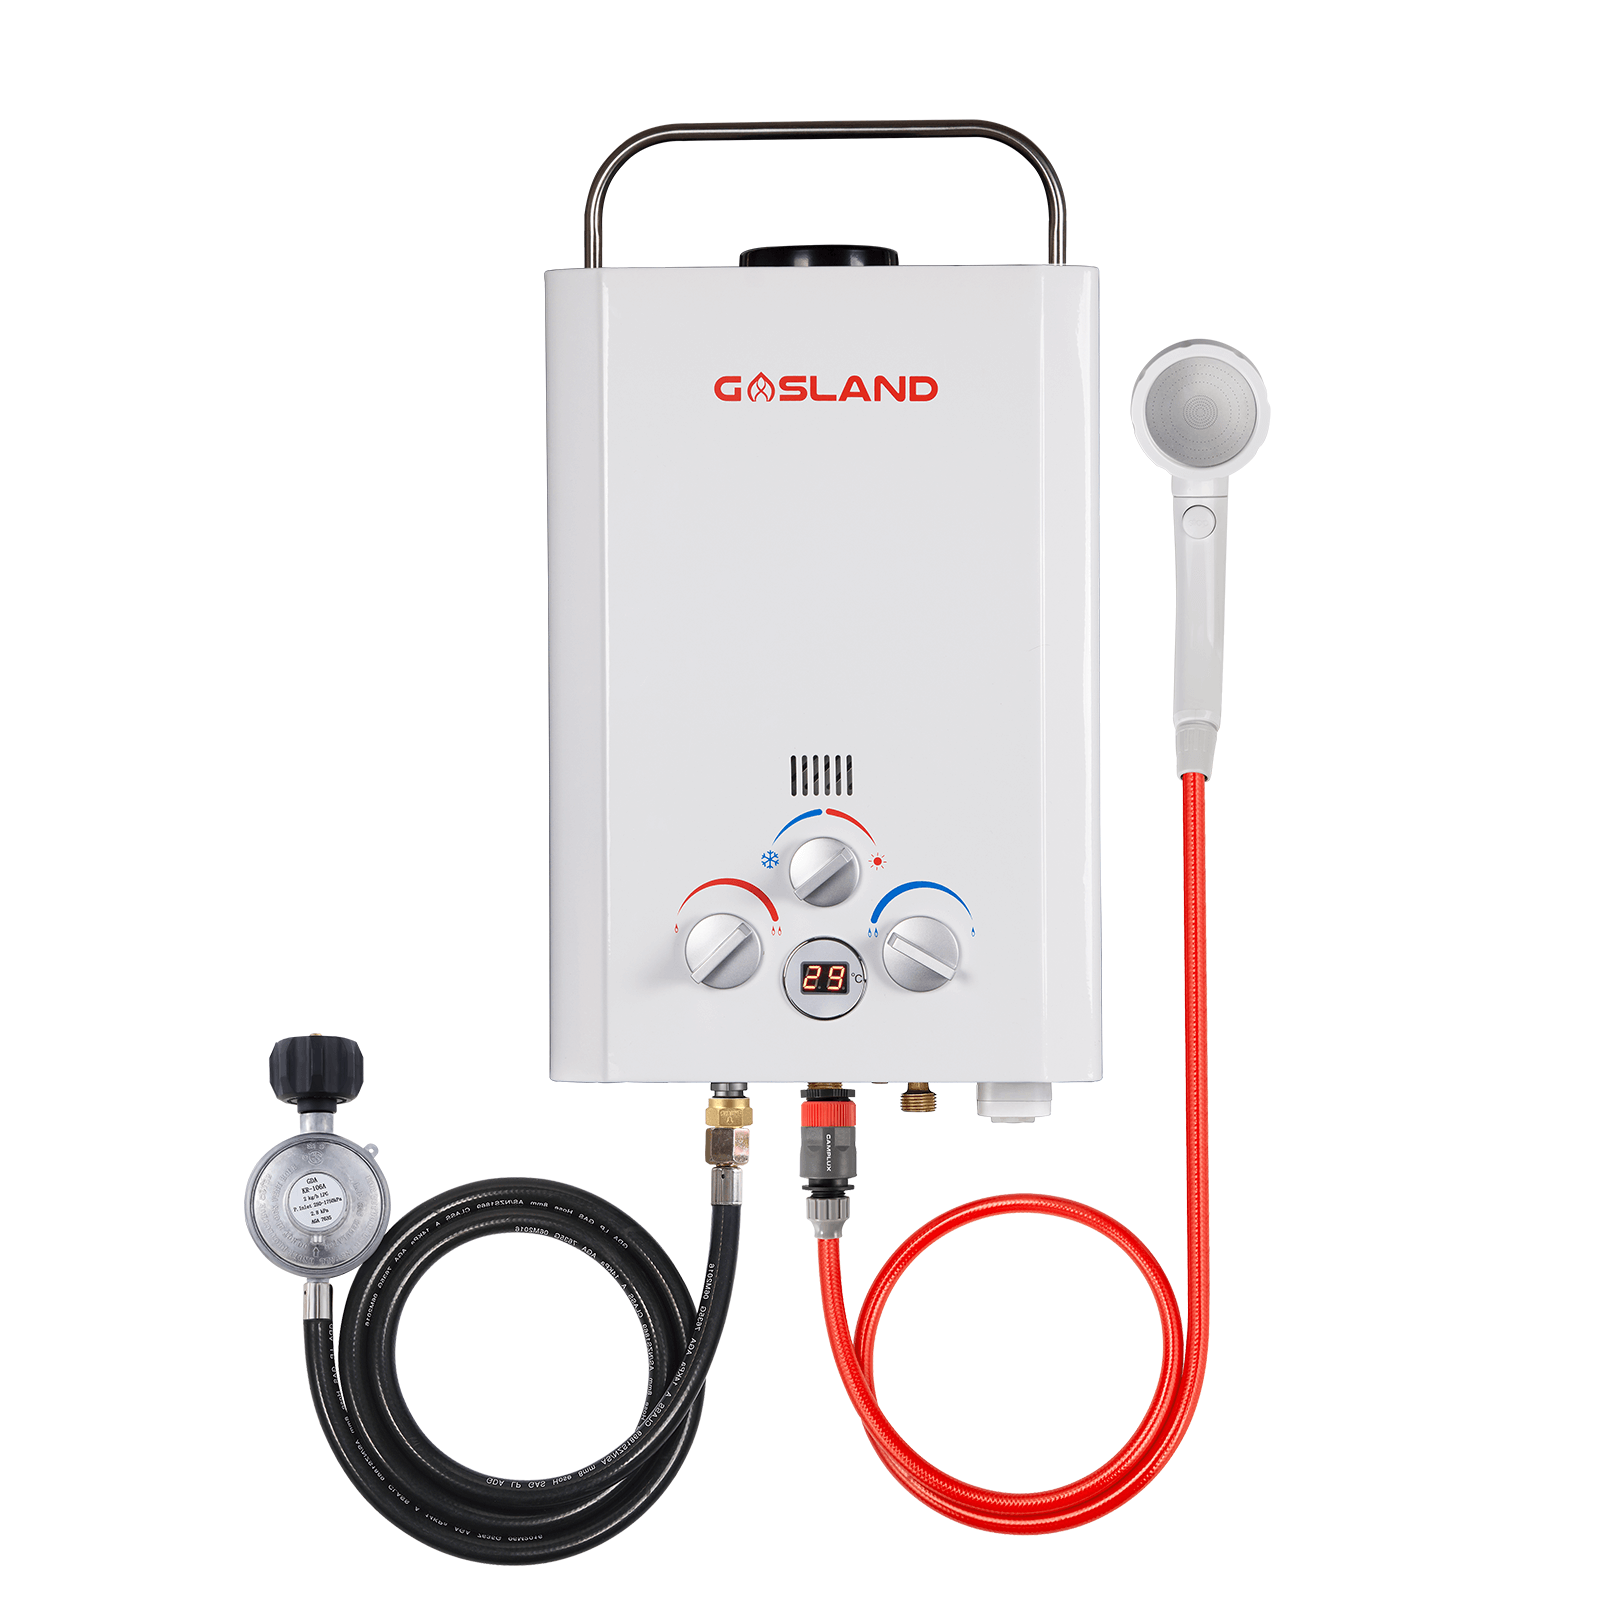 GASLAND Portable Tankless Propane Hot Water Heater - 1.58GPM 8L White